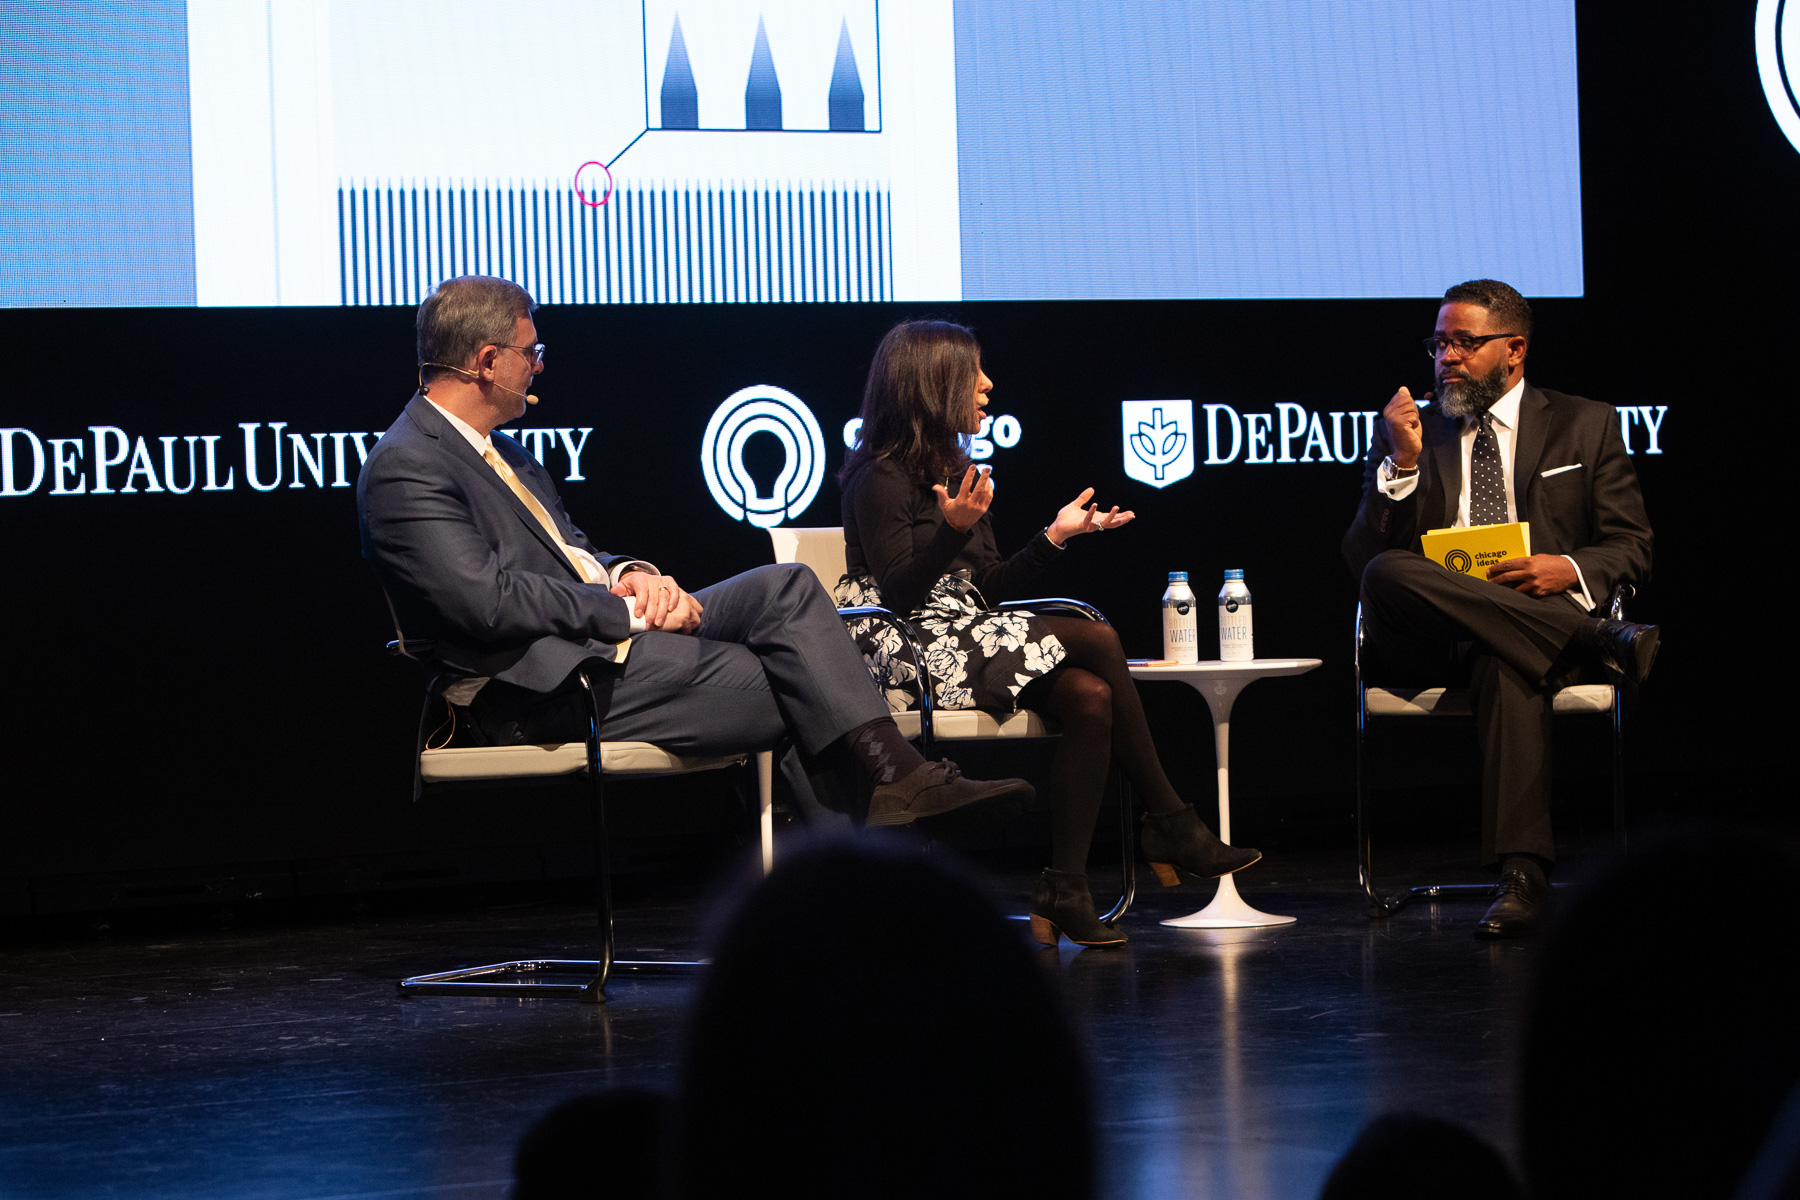 Michael Shear (left), White House correspondent for The New York Times; Julie Hirschfield Davis, congressional editor for The New York Times; and Jamil Smith, senior writer for Rolling Stone, speak during the Chicago Ideas Week panel "Are Borders Really the Problem?" (DePaul University/Randall Spriggs)